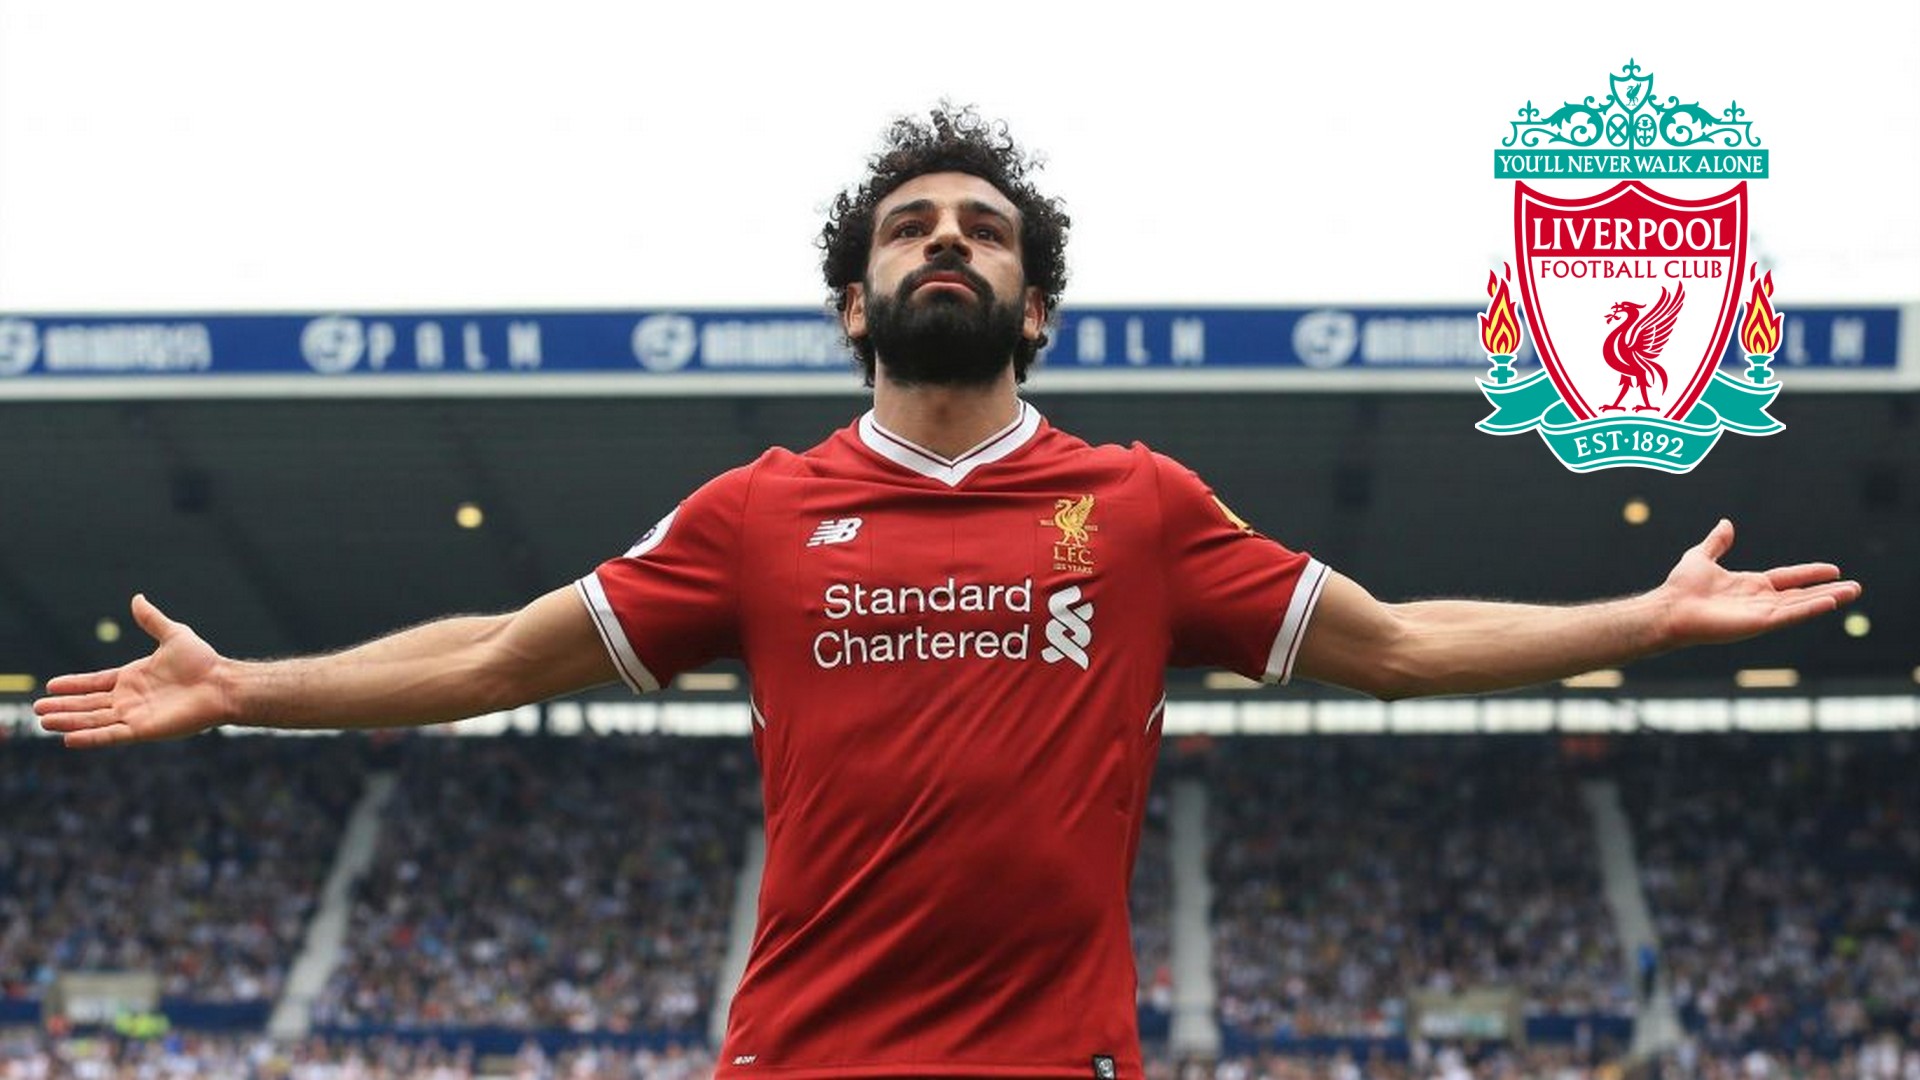 Mohamed Salah Desktop Wallpaper with image resolution 1920x1080 pixel. You can use this wallpaper as background for your desktop Computer Screensavers, Android or iPhone smartphones